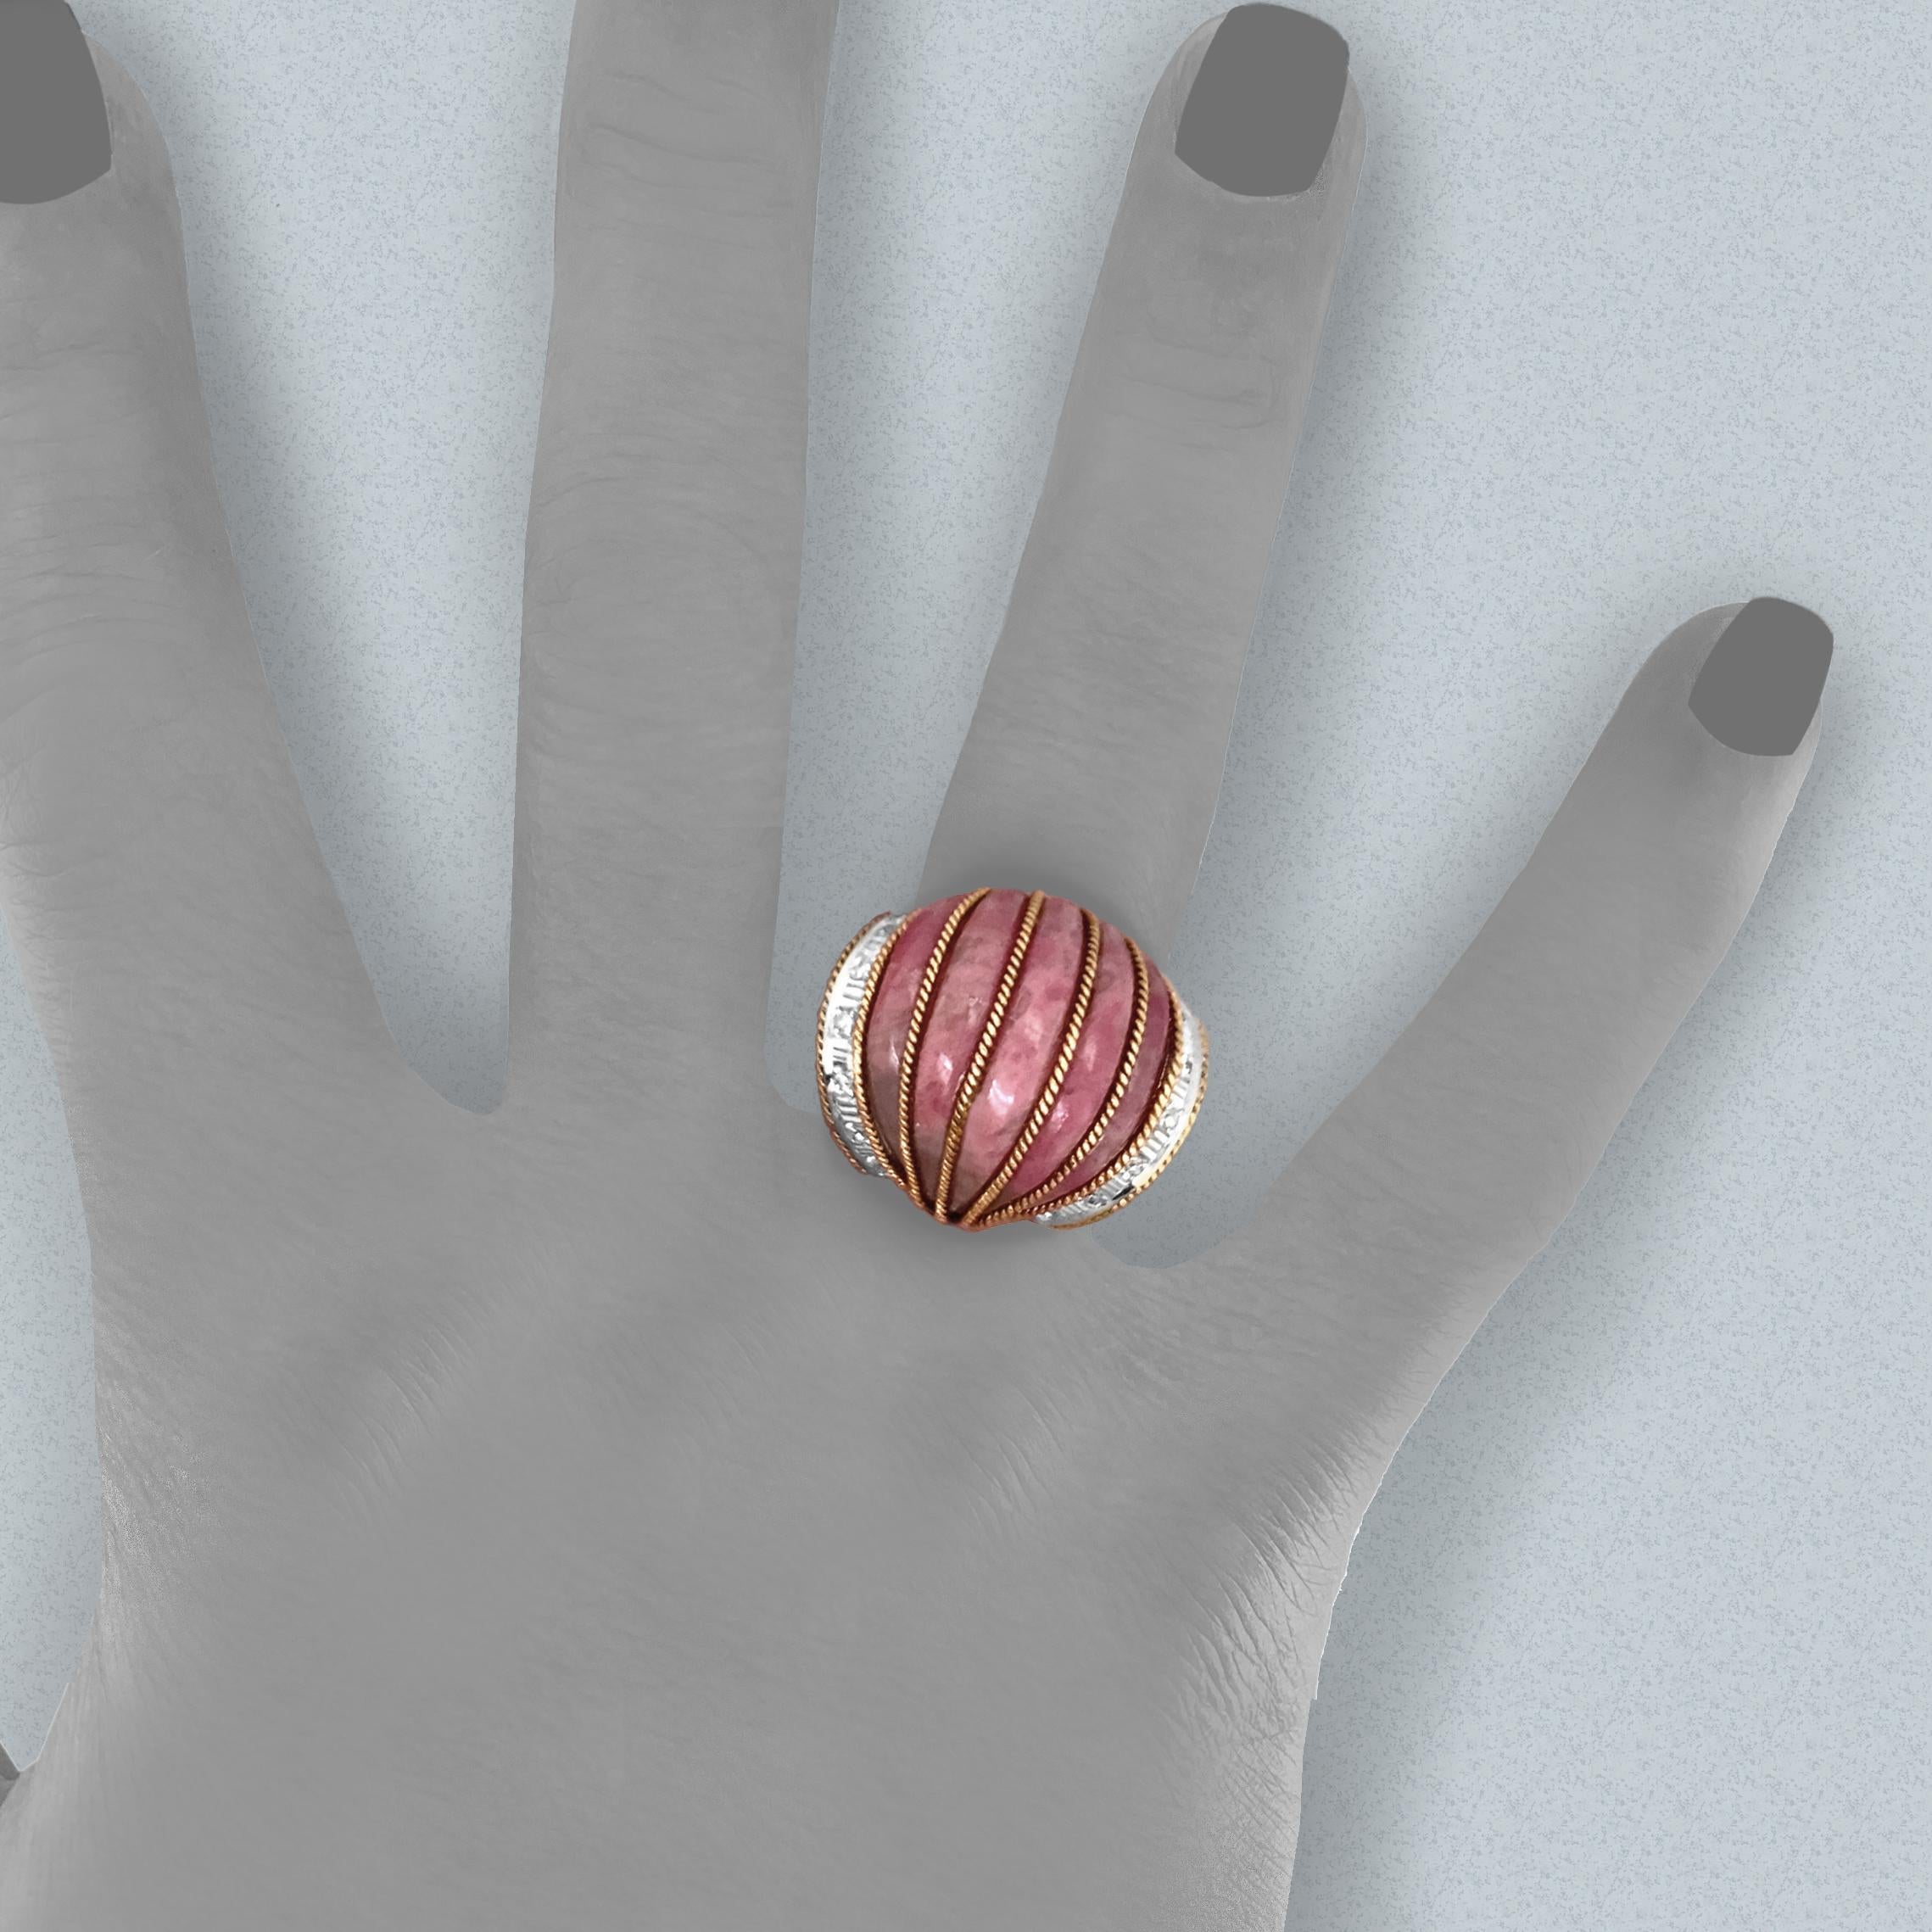 This unusual ring, undoubtedly a custom piece, features a fluted wedge of rhodochrosite.  A beautiful, rasberry-colored stone, rhodochrosite only came on the market in the 1940s with an important discovery in Argentina.  

The stone is 